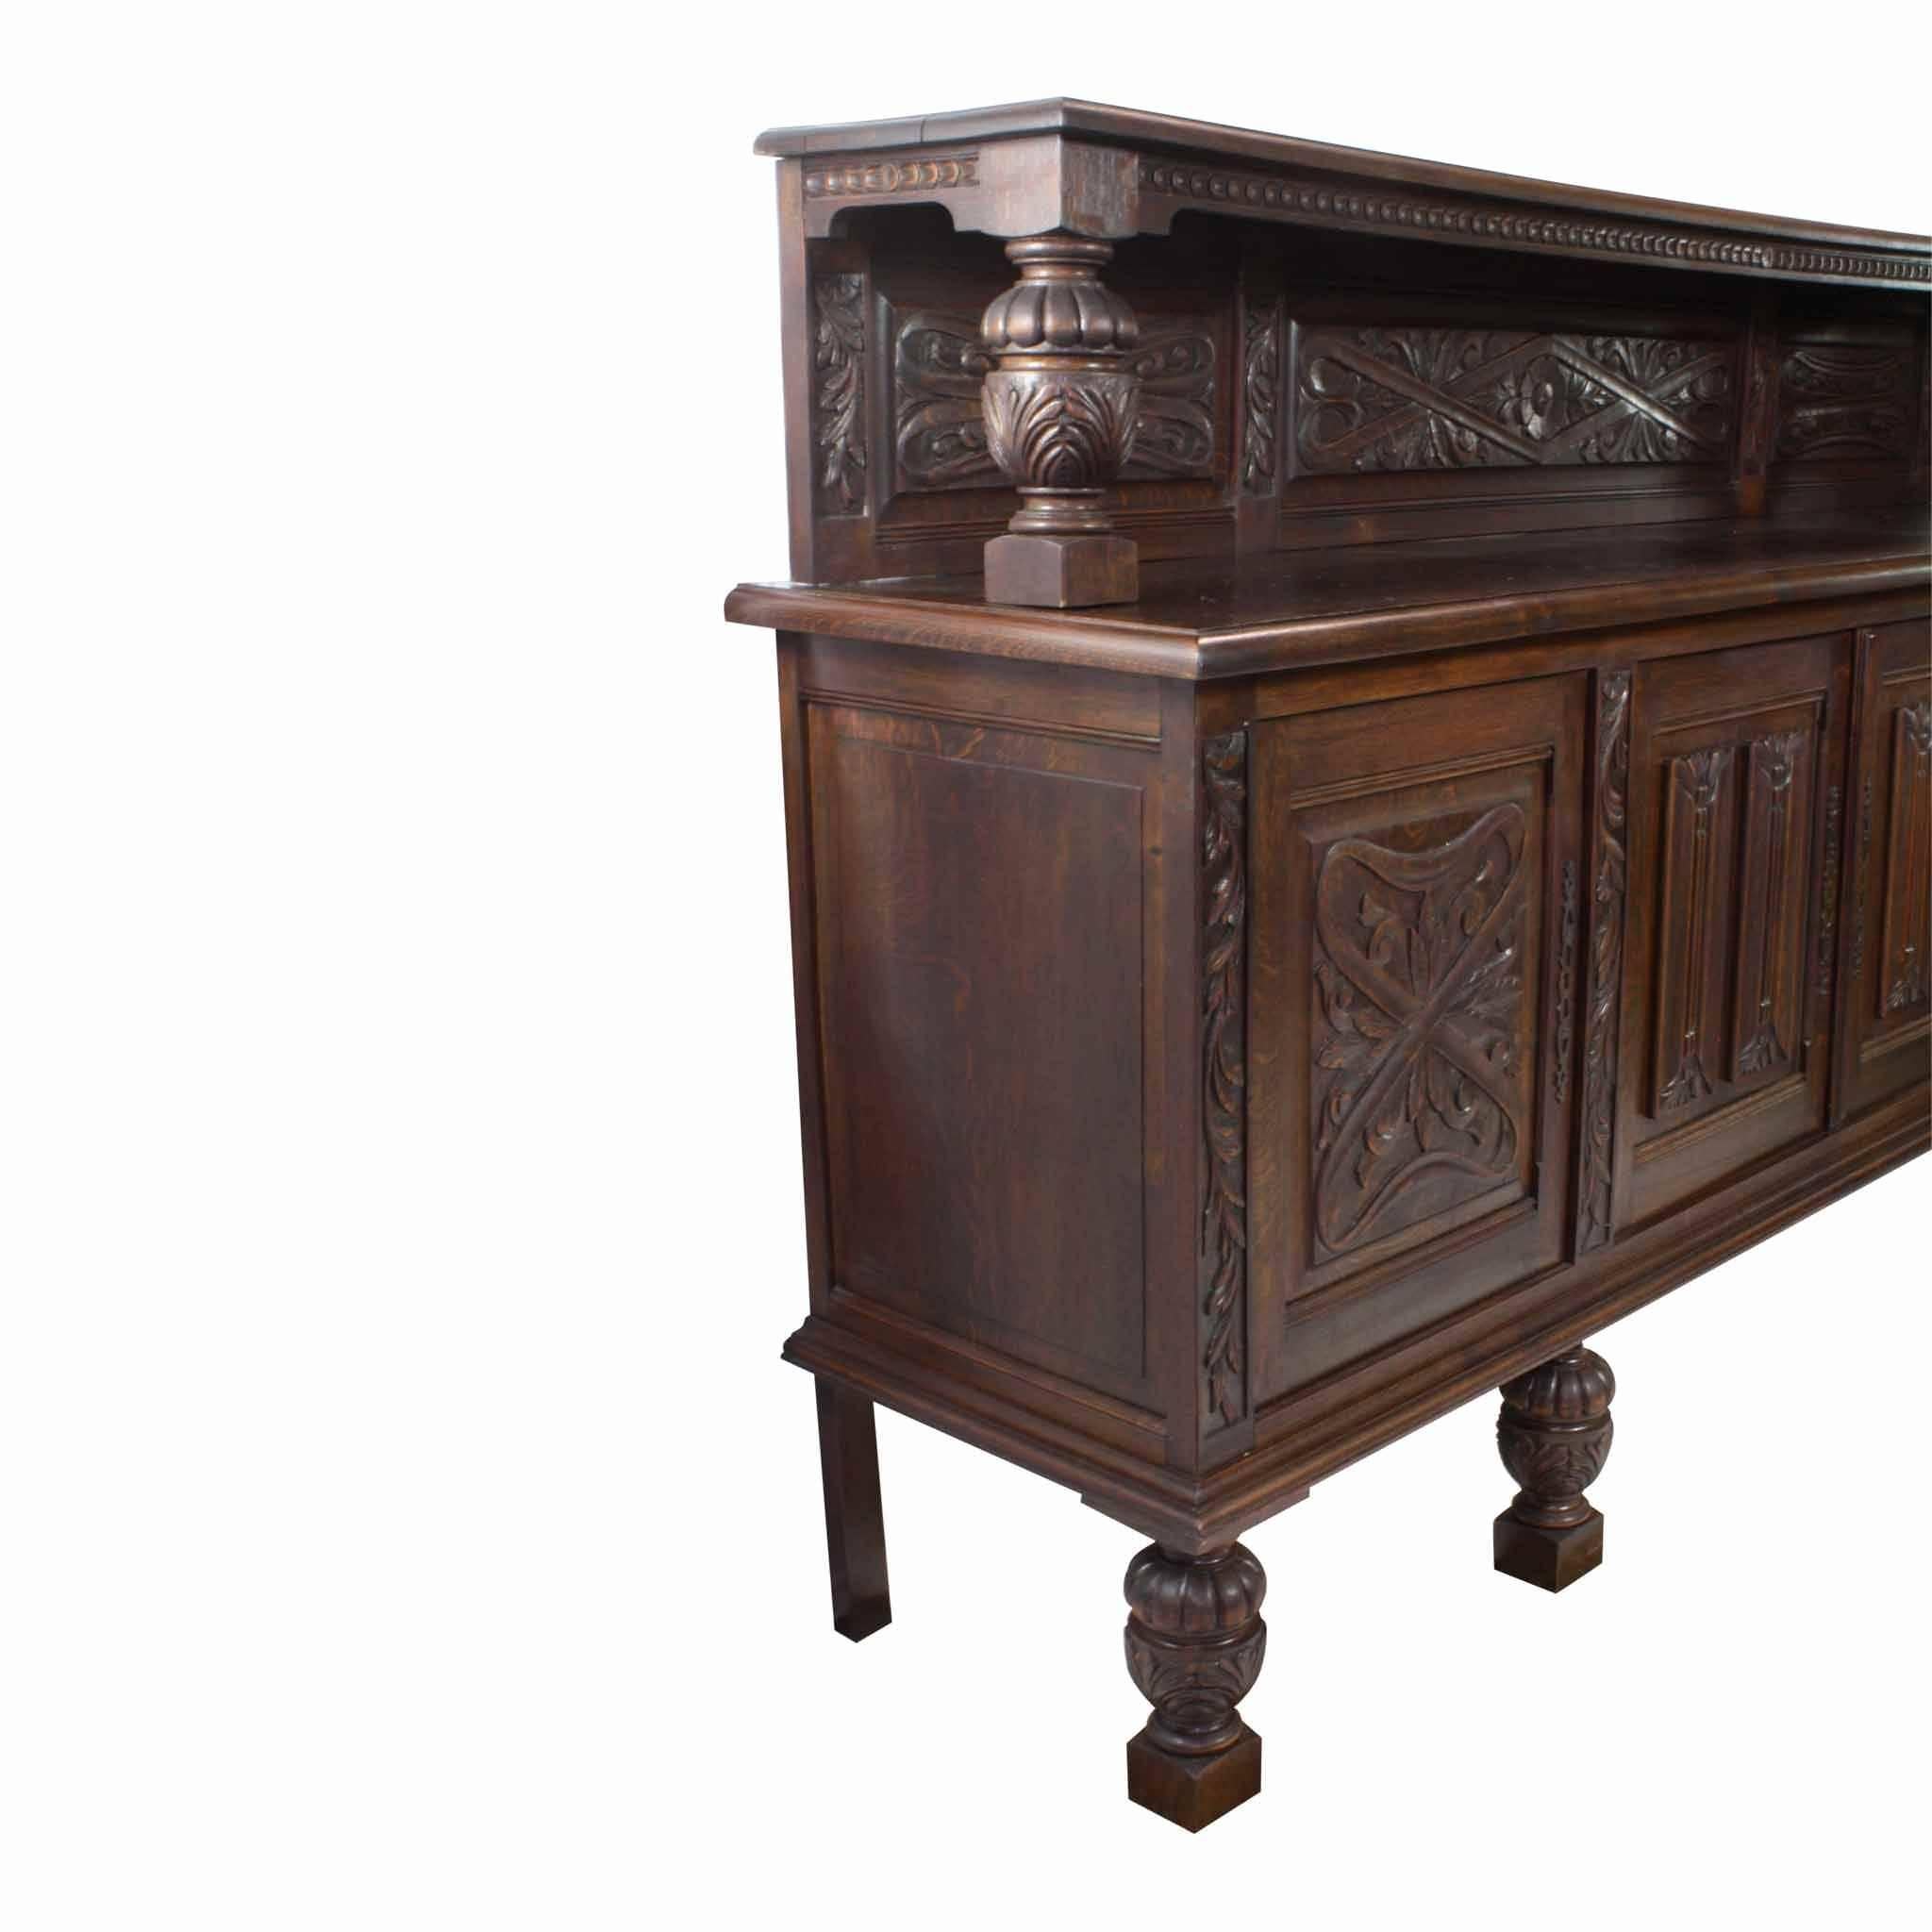 The center doors are reeded and capped at the top and bottom with foliage. The outer doors are carved with a geometric pattern of foliage, which matches the carvings on the backboard. Acorn style legs and risers give the sideboard height. The top